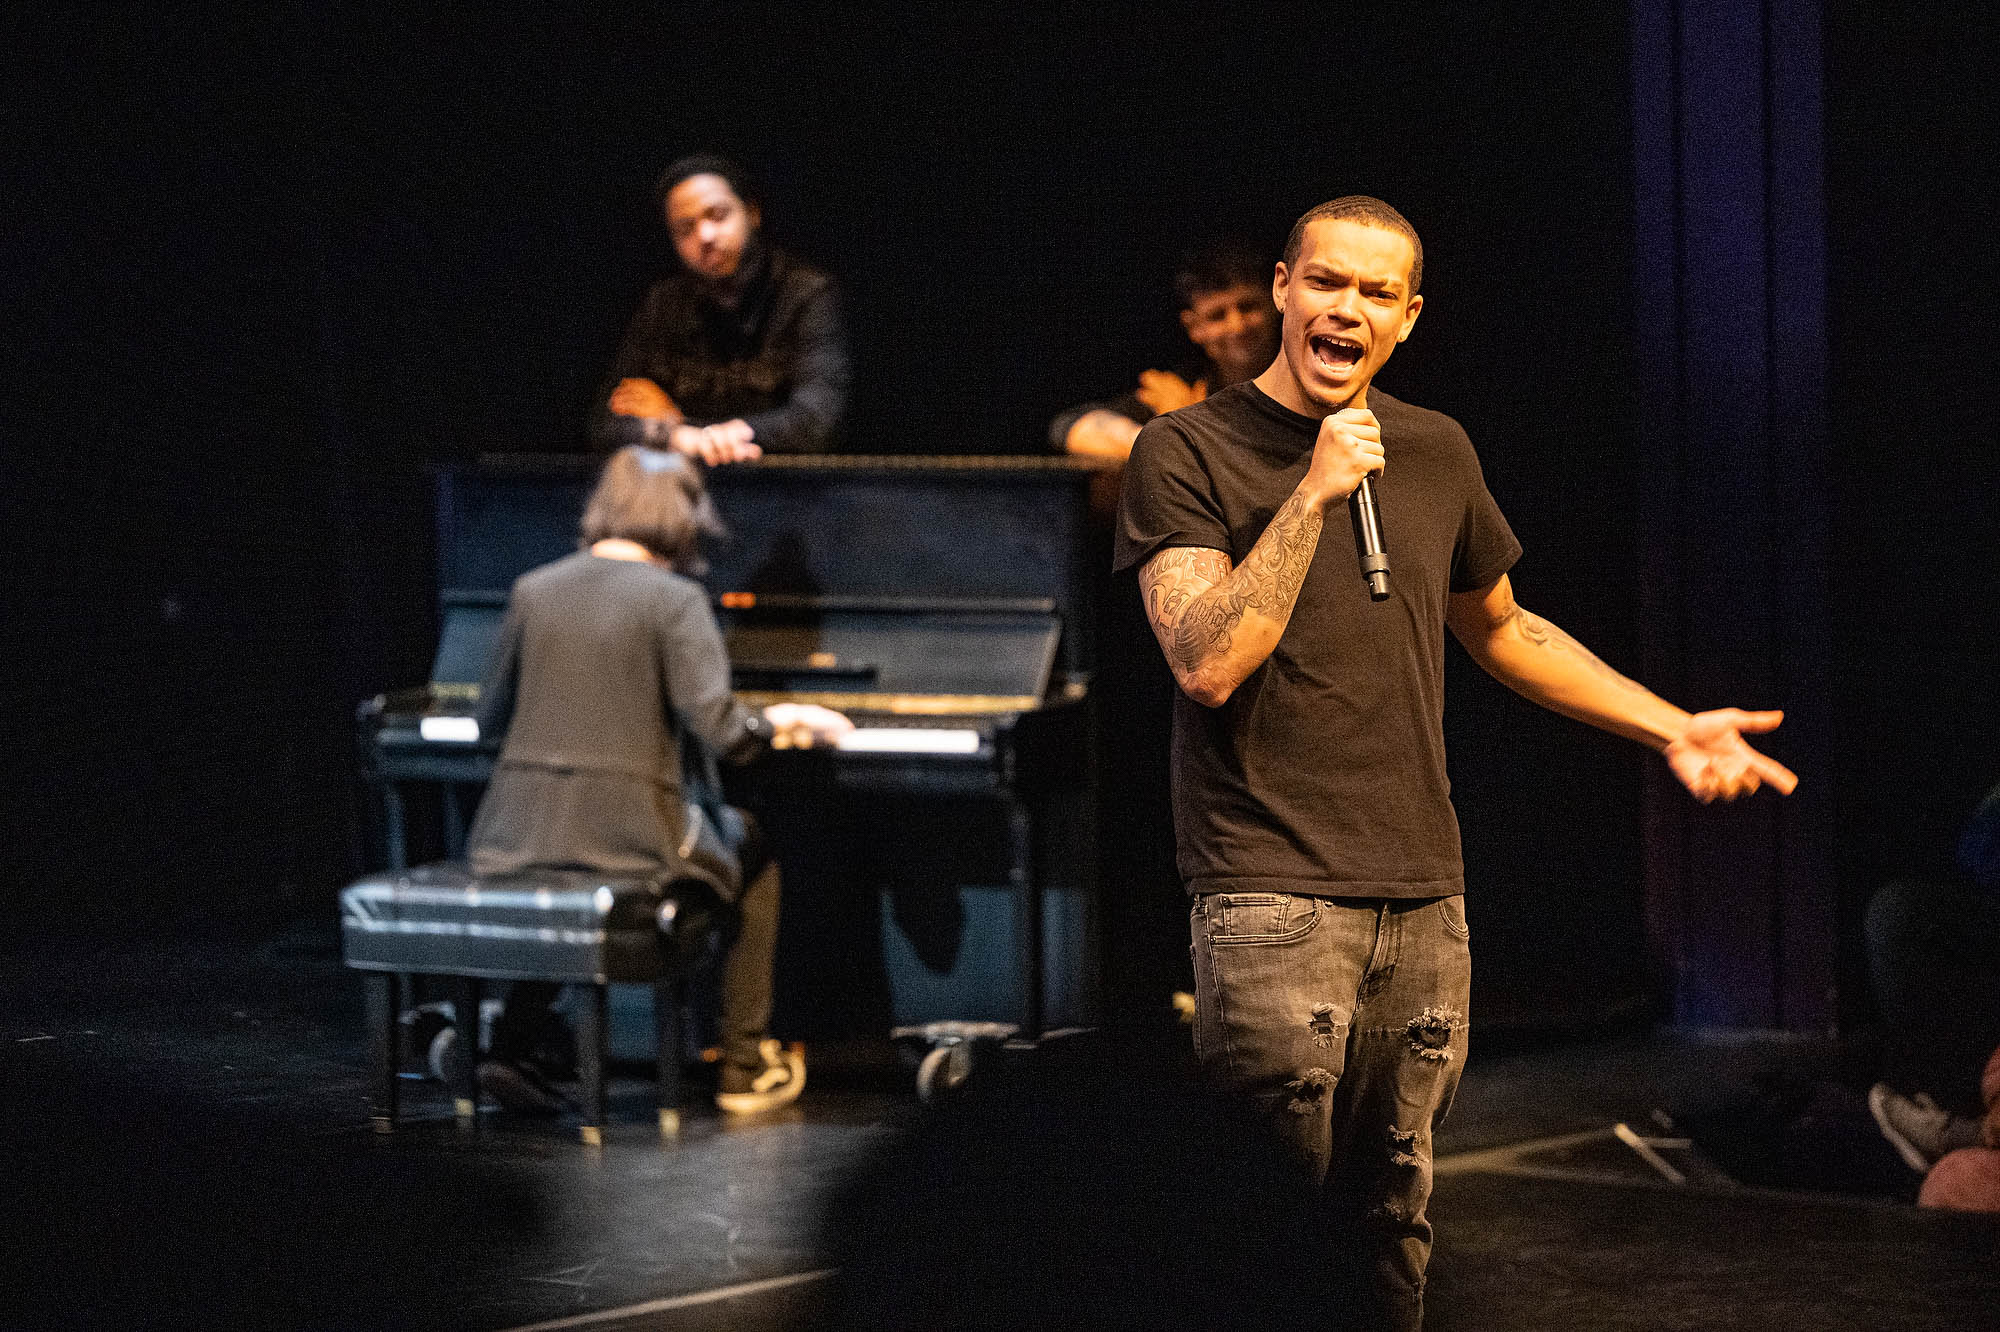 A performer dressed in black speaks into a microphone while behind him other performers dressed in black play a piano and watch.